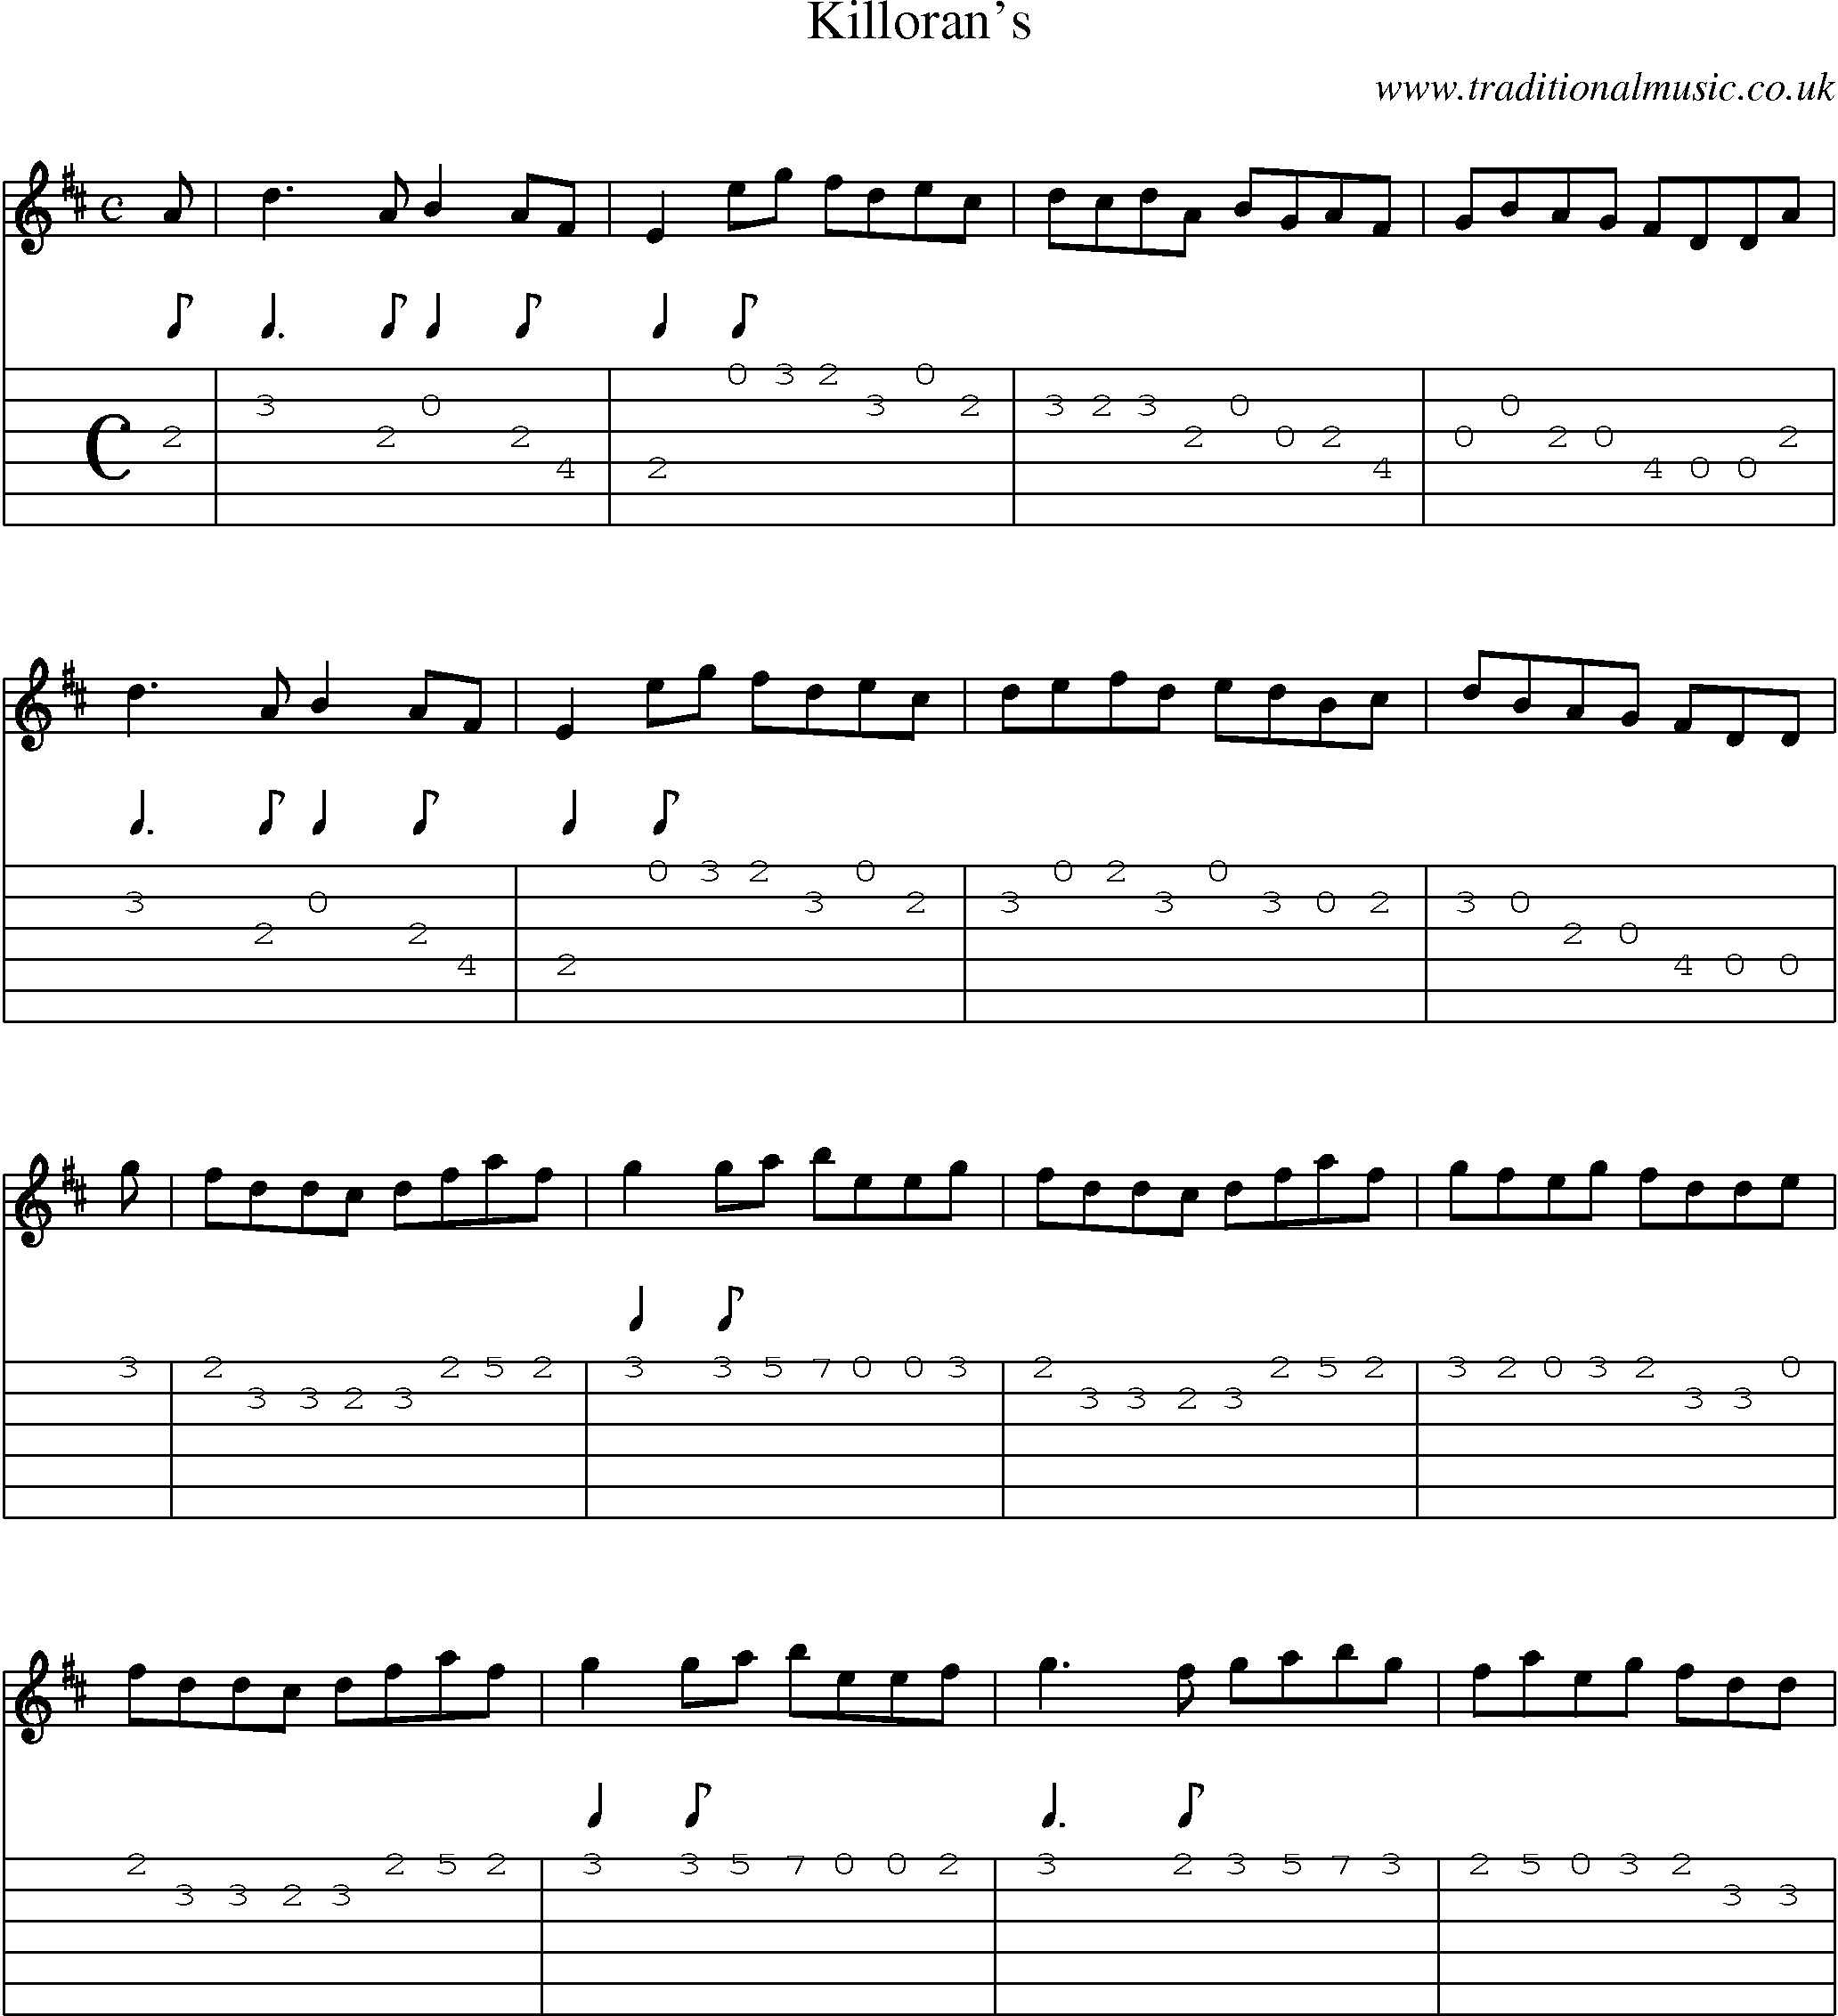 Music Score and Guitar Tabs for Killorans